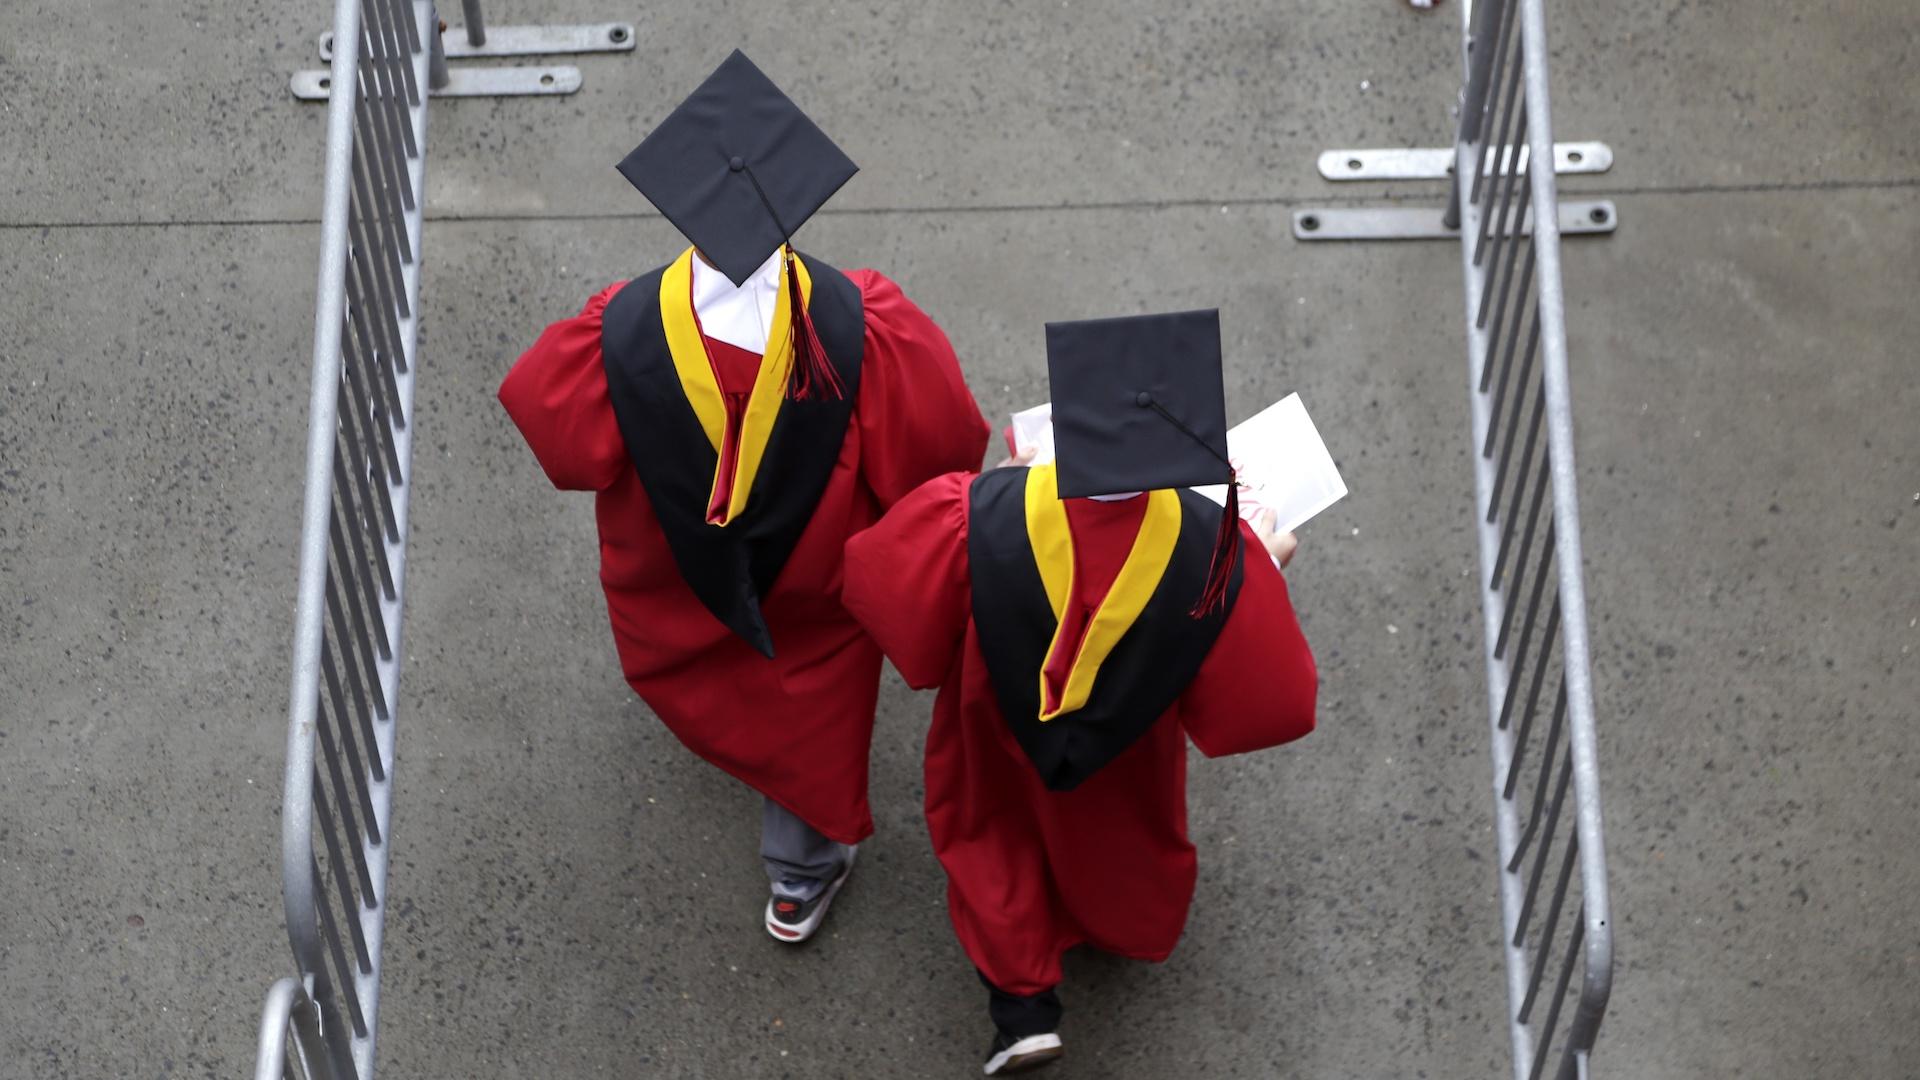 New graduates walk into the High Point Solutions Stadium before the start of the Rutgers University graduation ceremony in Piscataway Township, N.J., on May 13, 2018.  (AP Photo/Seth Wenig, File)